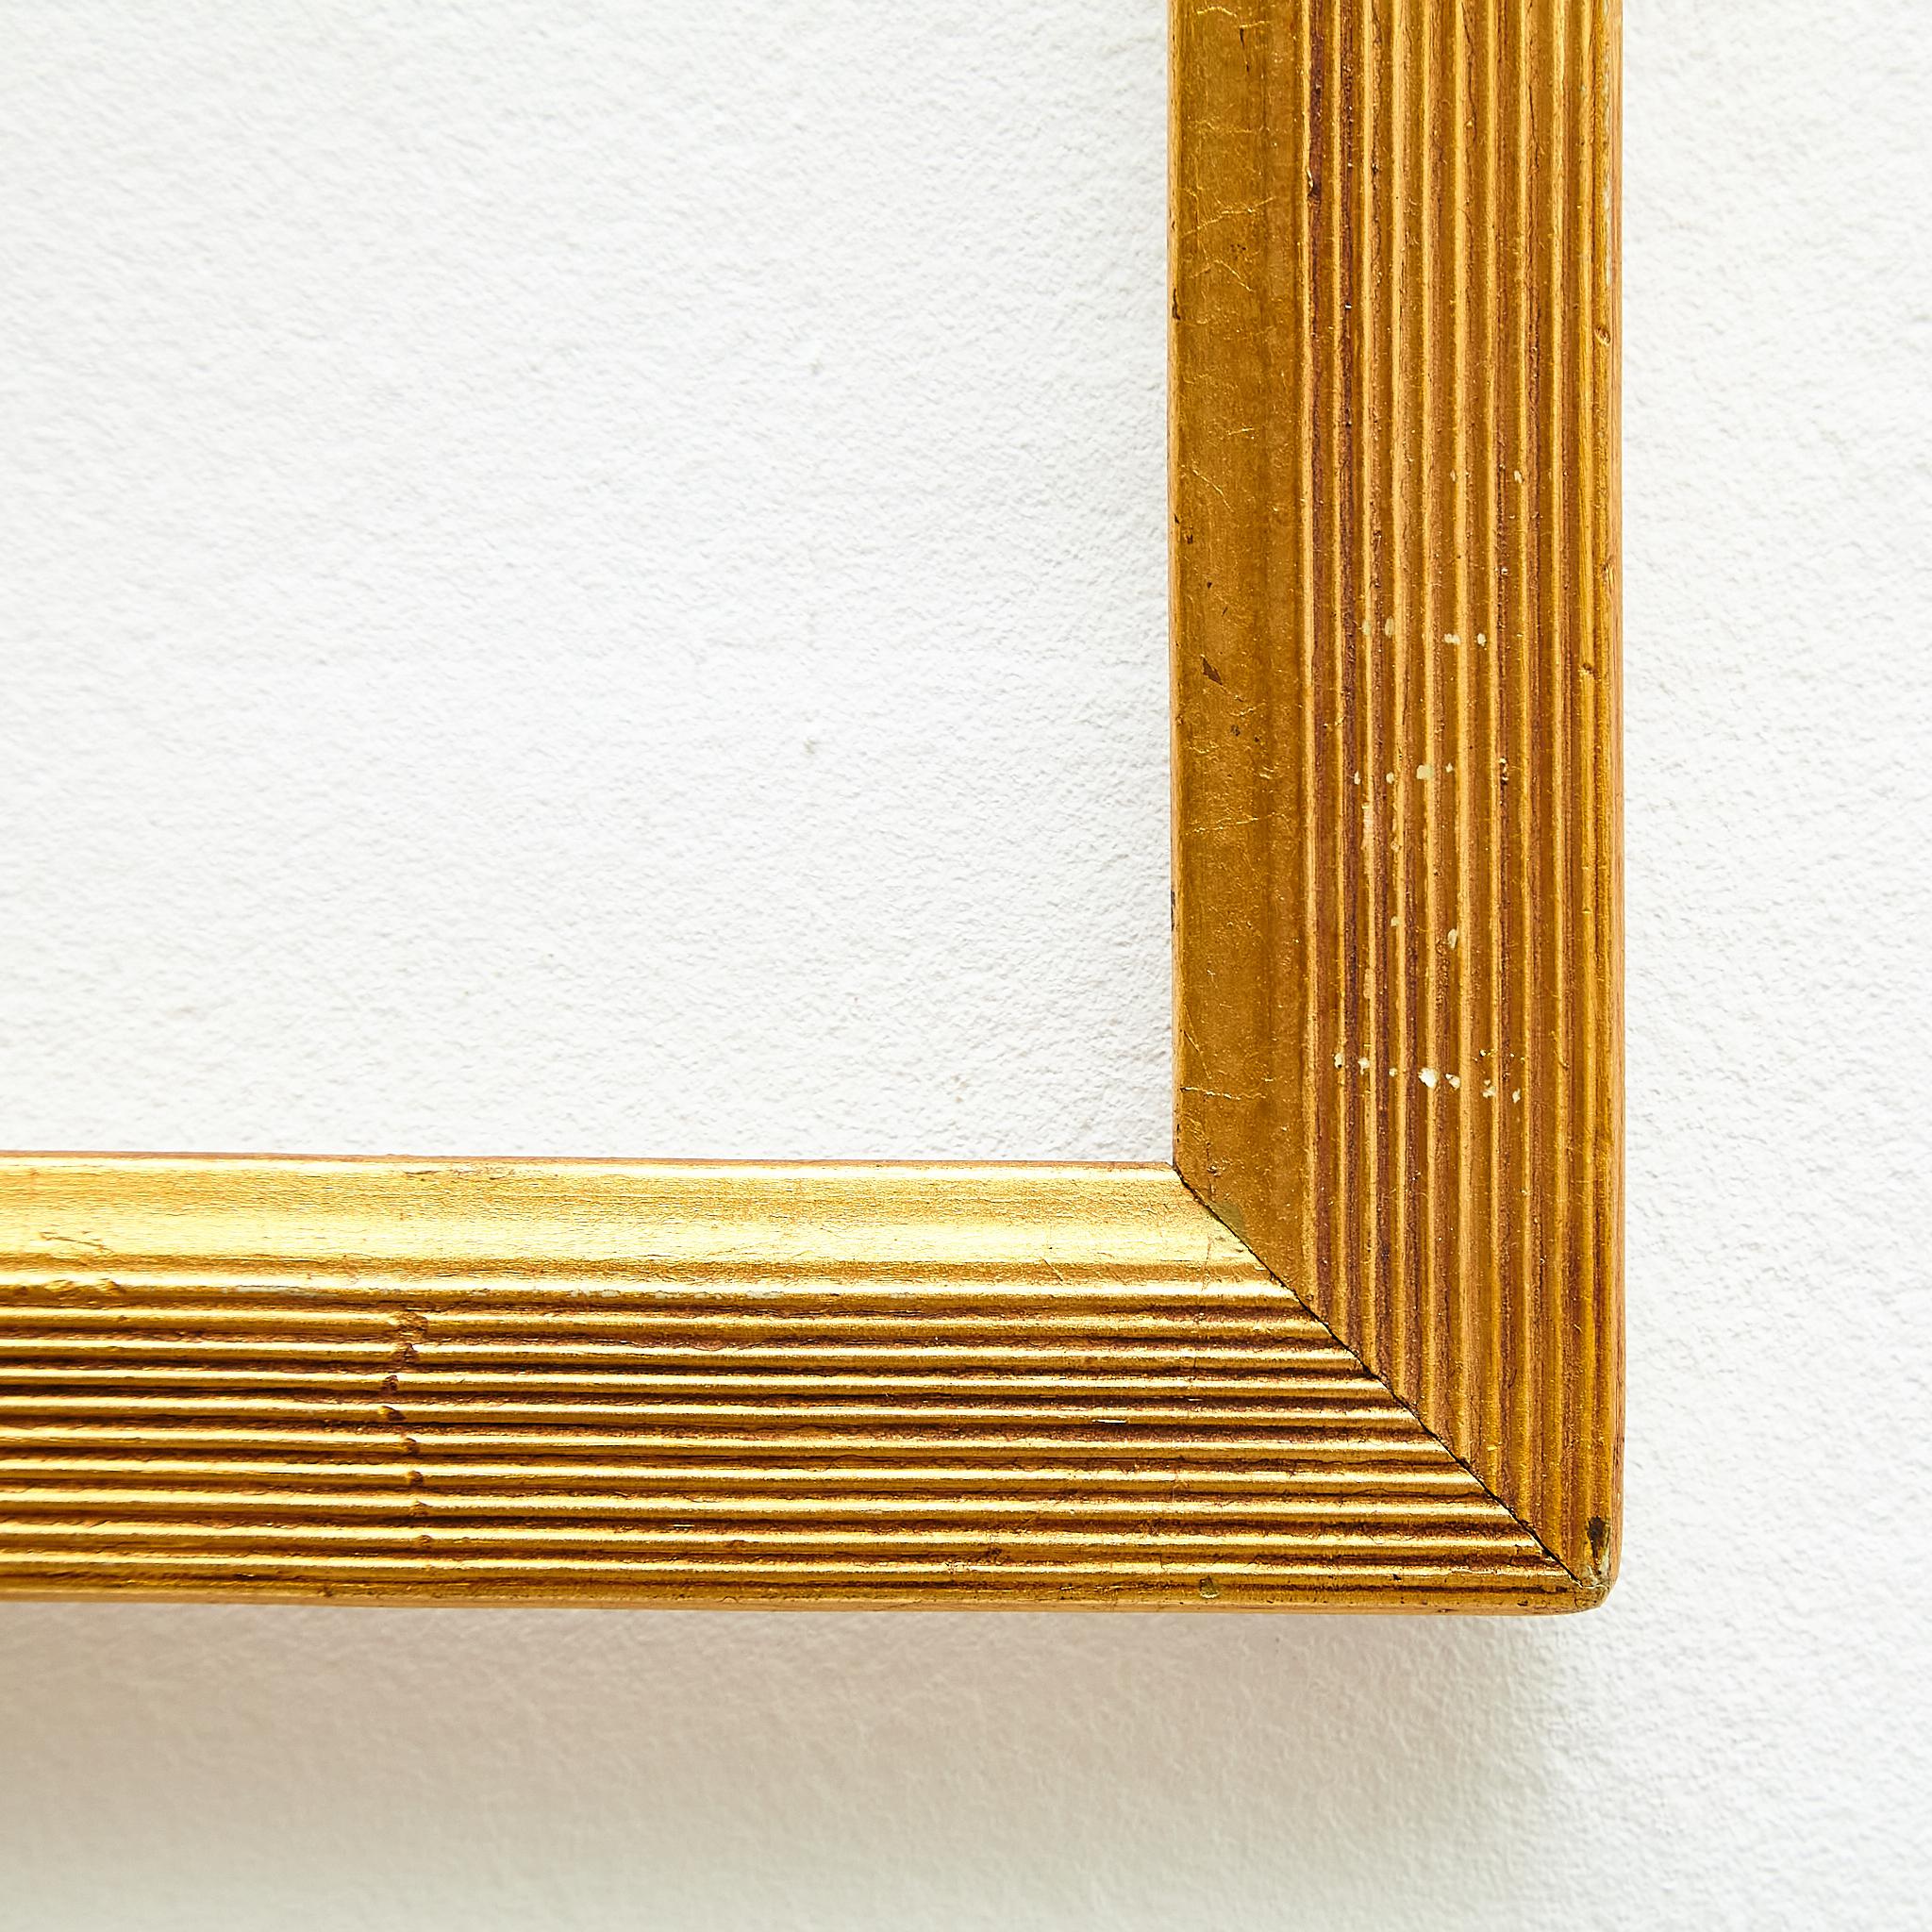 Hand-Painted Antique Gold Wood Frame, circa 1950